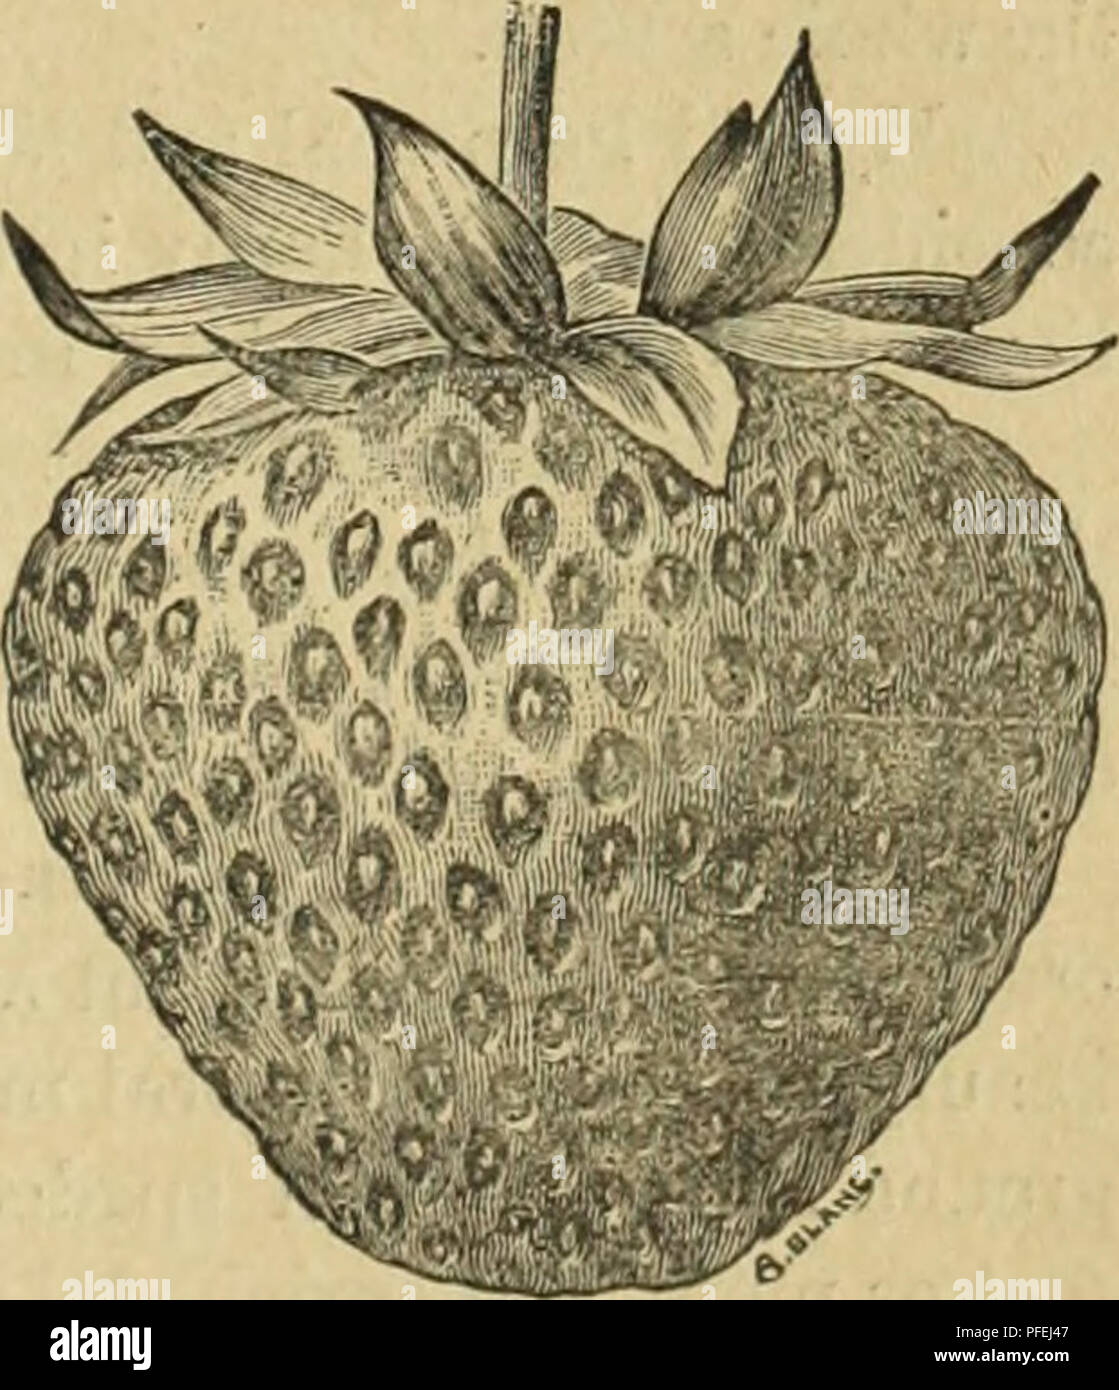 . Descriptive catalogue of fruit, shade, and ornamental trees, roses, shrubs, plants, etc.. Nursery stock California Catalogs; Fruit trees Catalogs; Ornamental trees Catalogs; Fruit Catalogs; Evergreens Catalogs; Roses Catalogs. SHARPLESS. Sharpless. (H.) Fruit very large ; flesh firm, sweet, with a delicate aroma. One of the finest. Crescent Seedling. One of the most productive straw- berries, medium size ; bright scarlet color, good flavor. Big Bob. The boss of all strawberries ; brilliant scarlet, juicy, rich and delicious. Jumbo. Very large ; bright crimson red ; a very promising variety.  Stock Photo